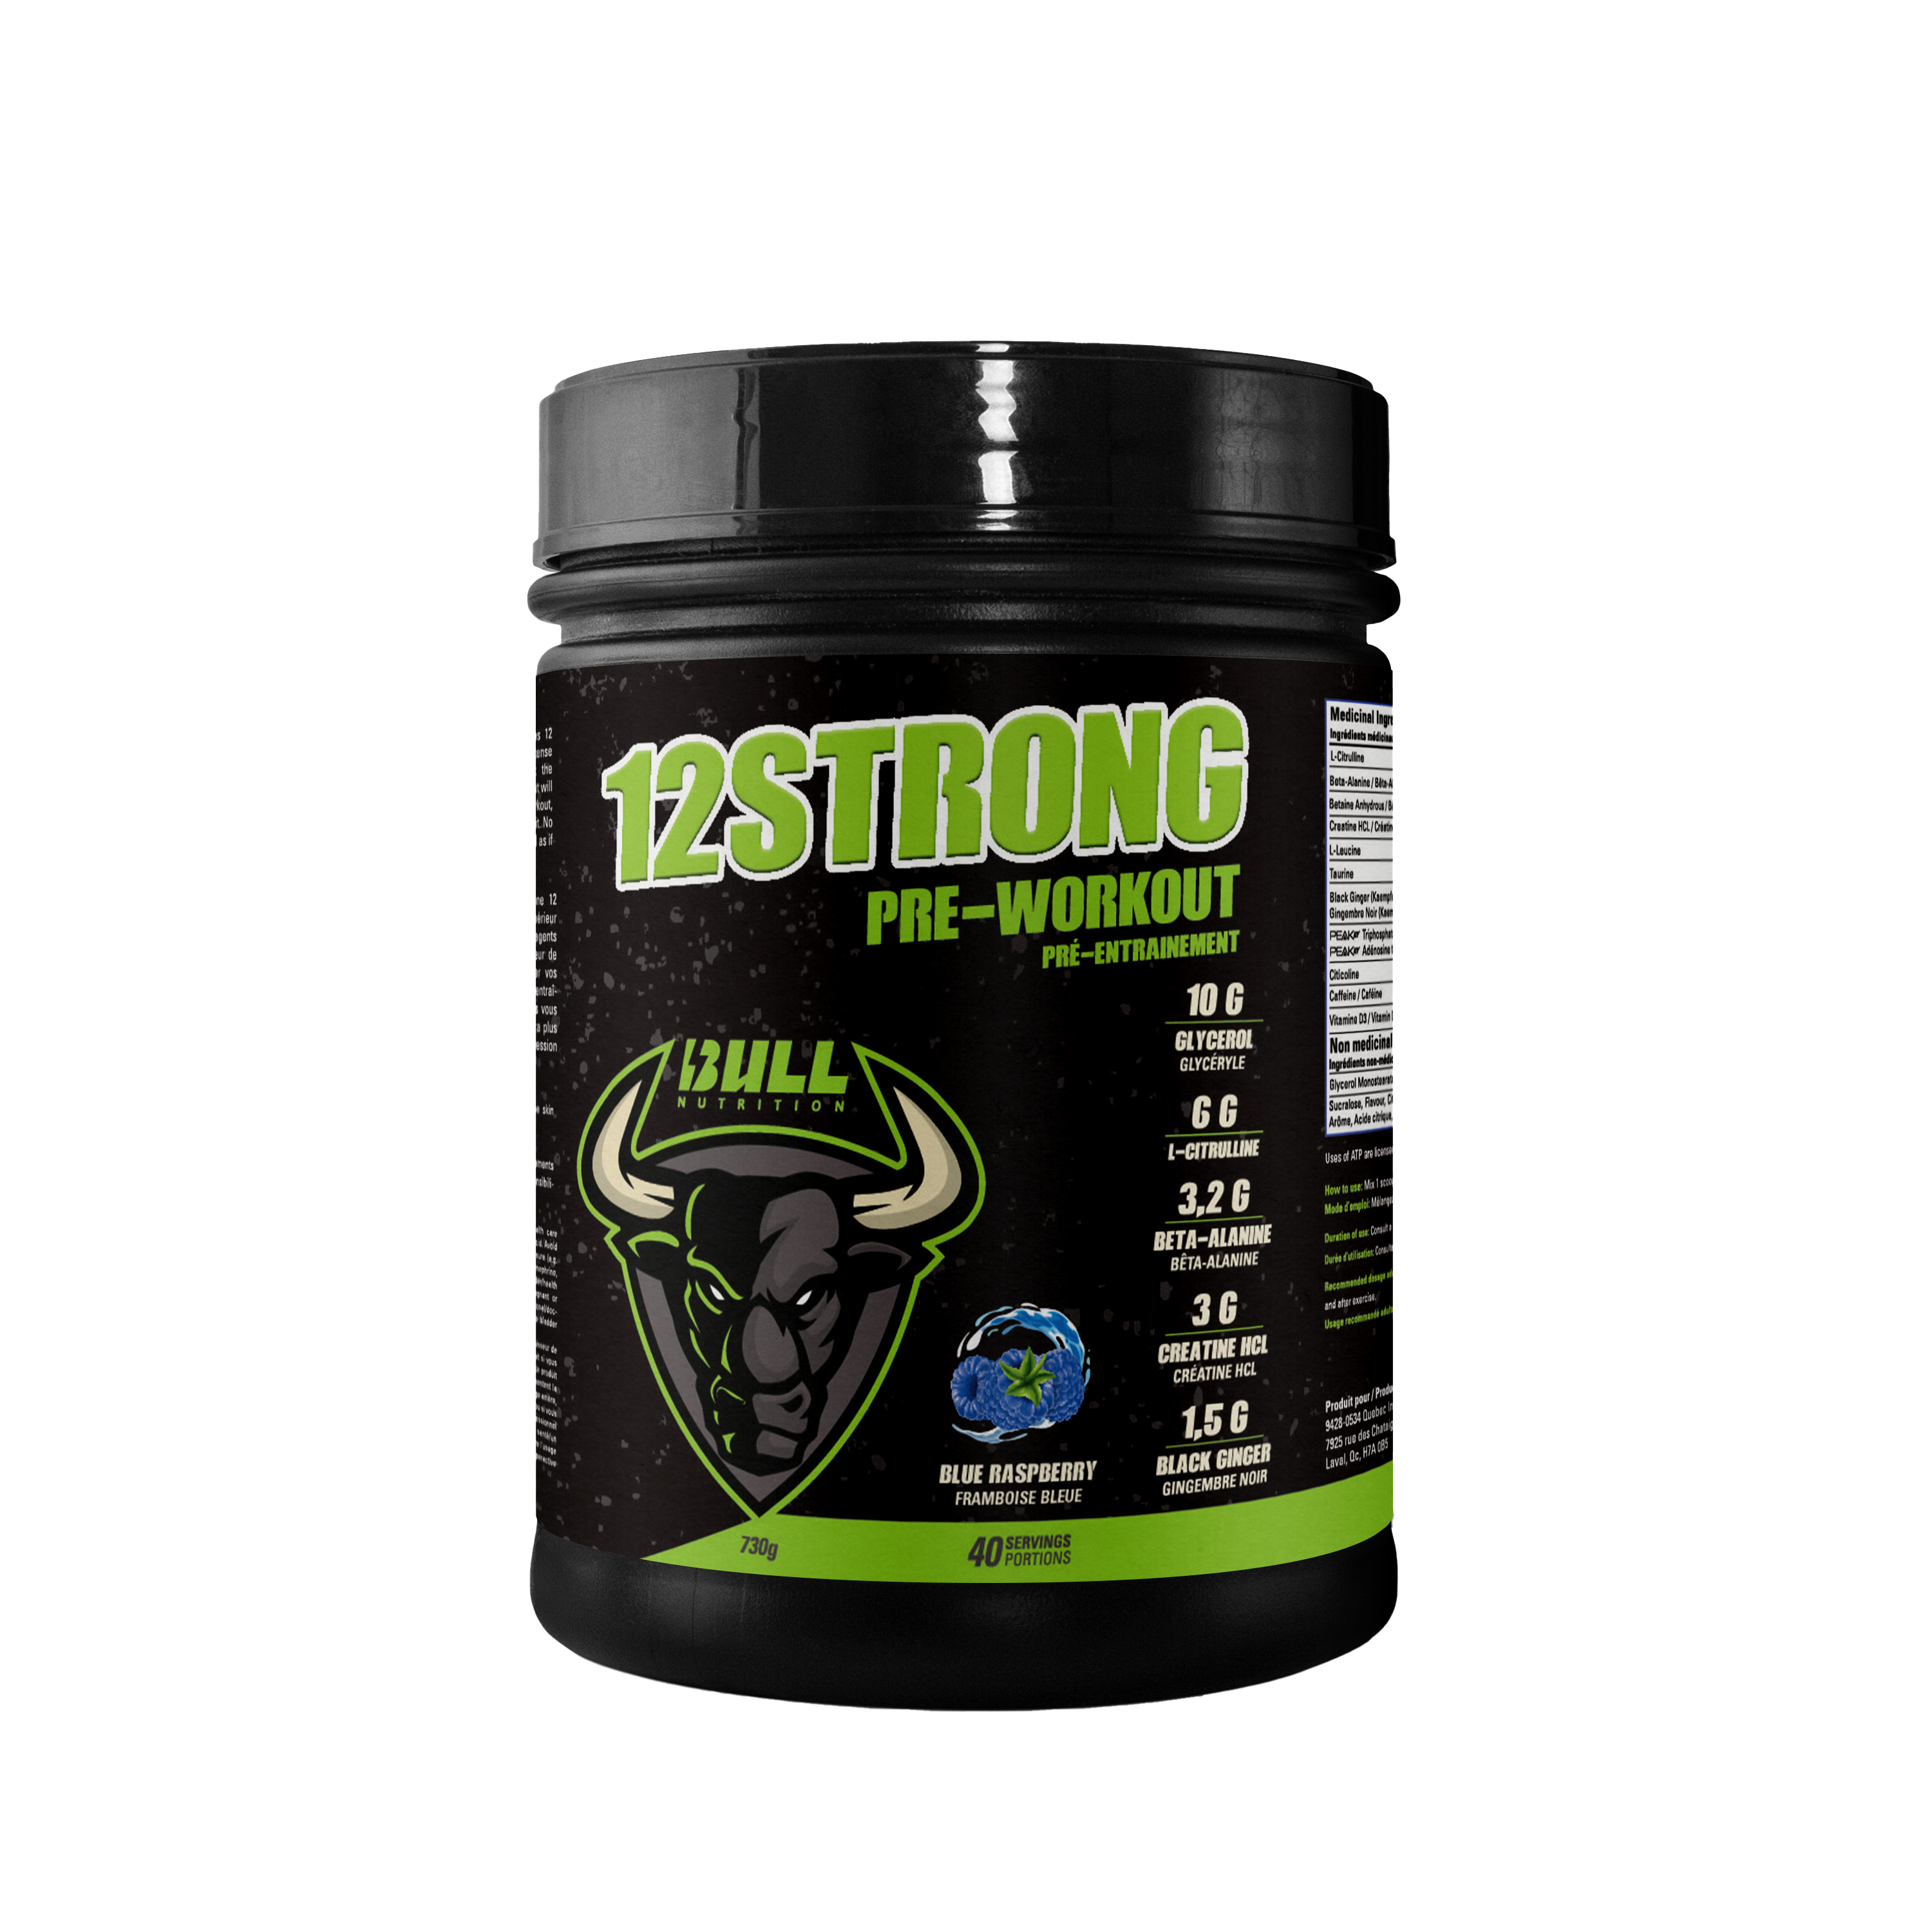 12 STRONG Pre-Workout – Blue Raspberry